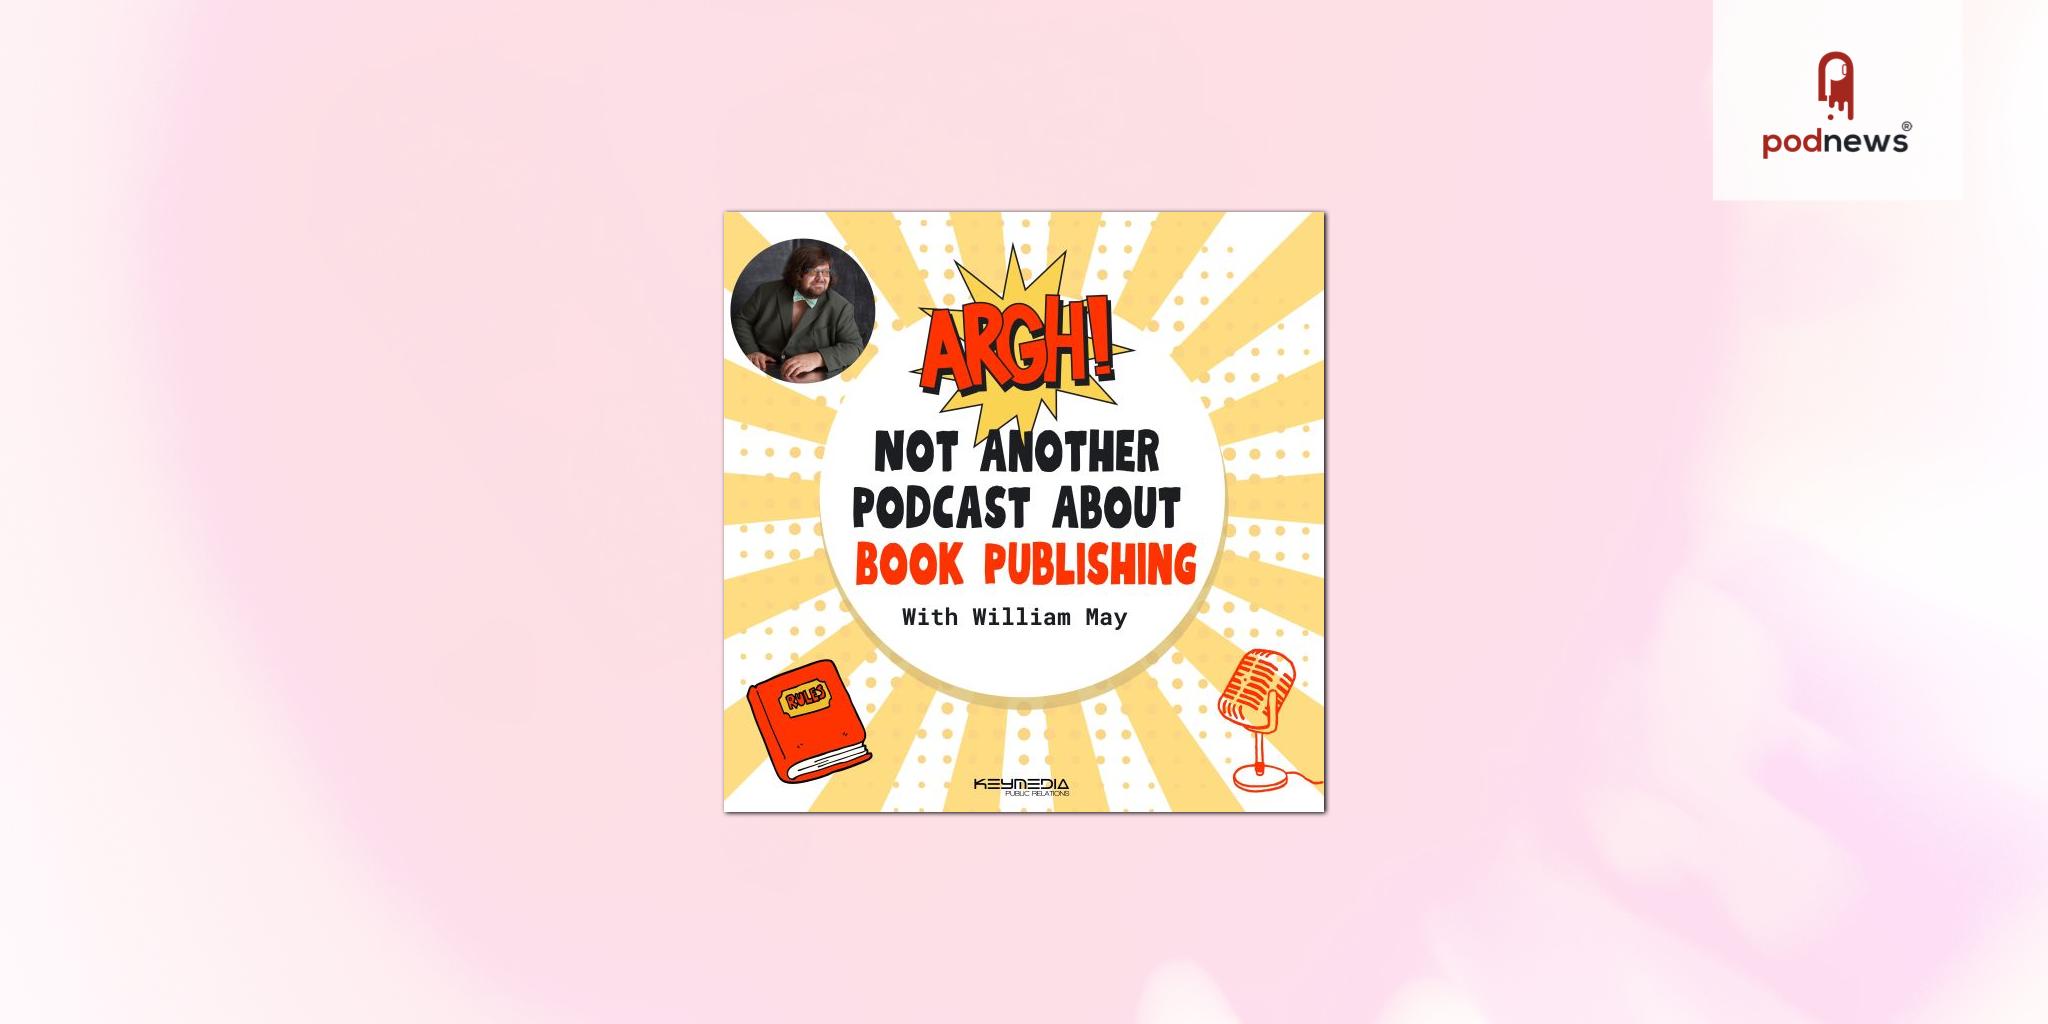 Breaking the Mold: Argh! Not Another Podcast About Book Publishing Unveils a Refreshing Take on the Industry